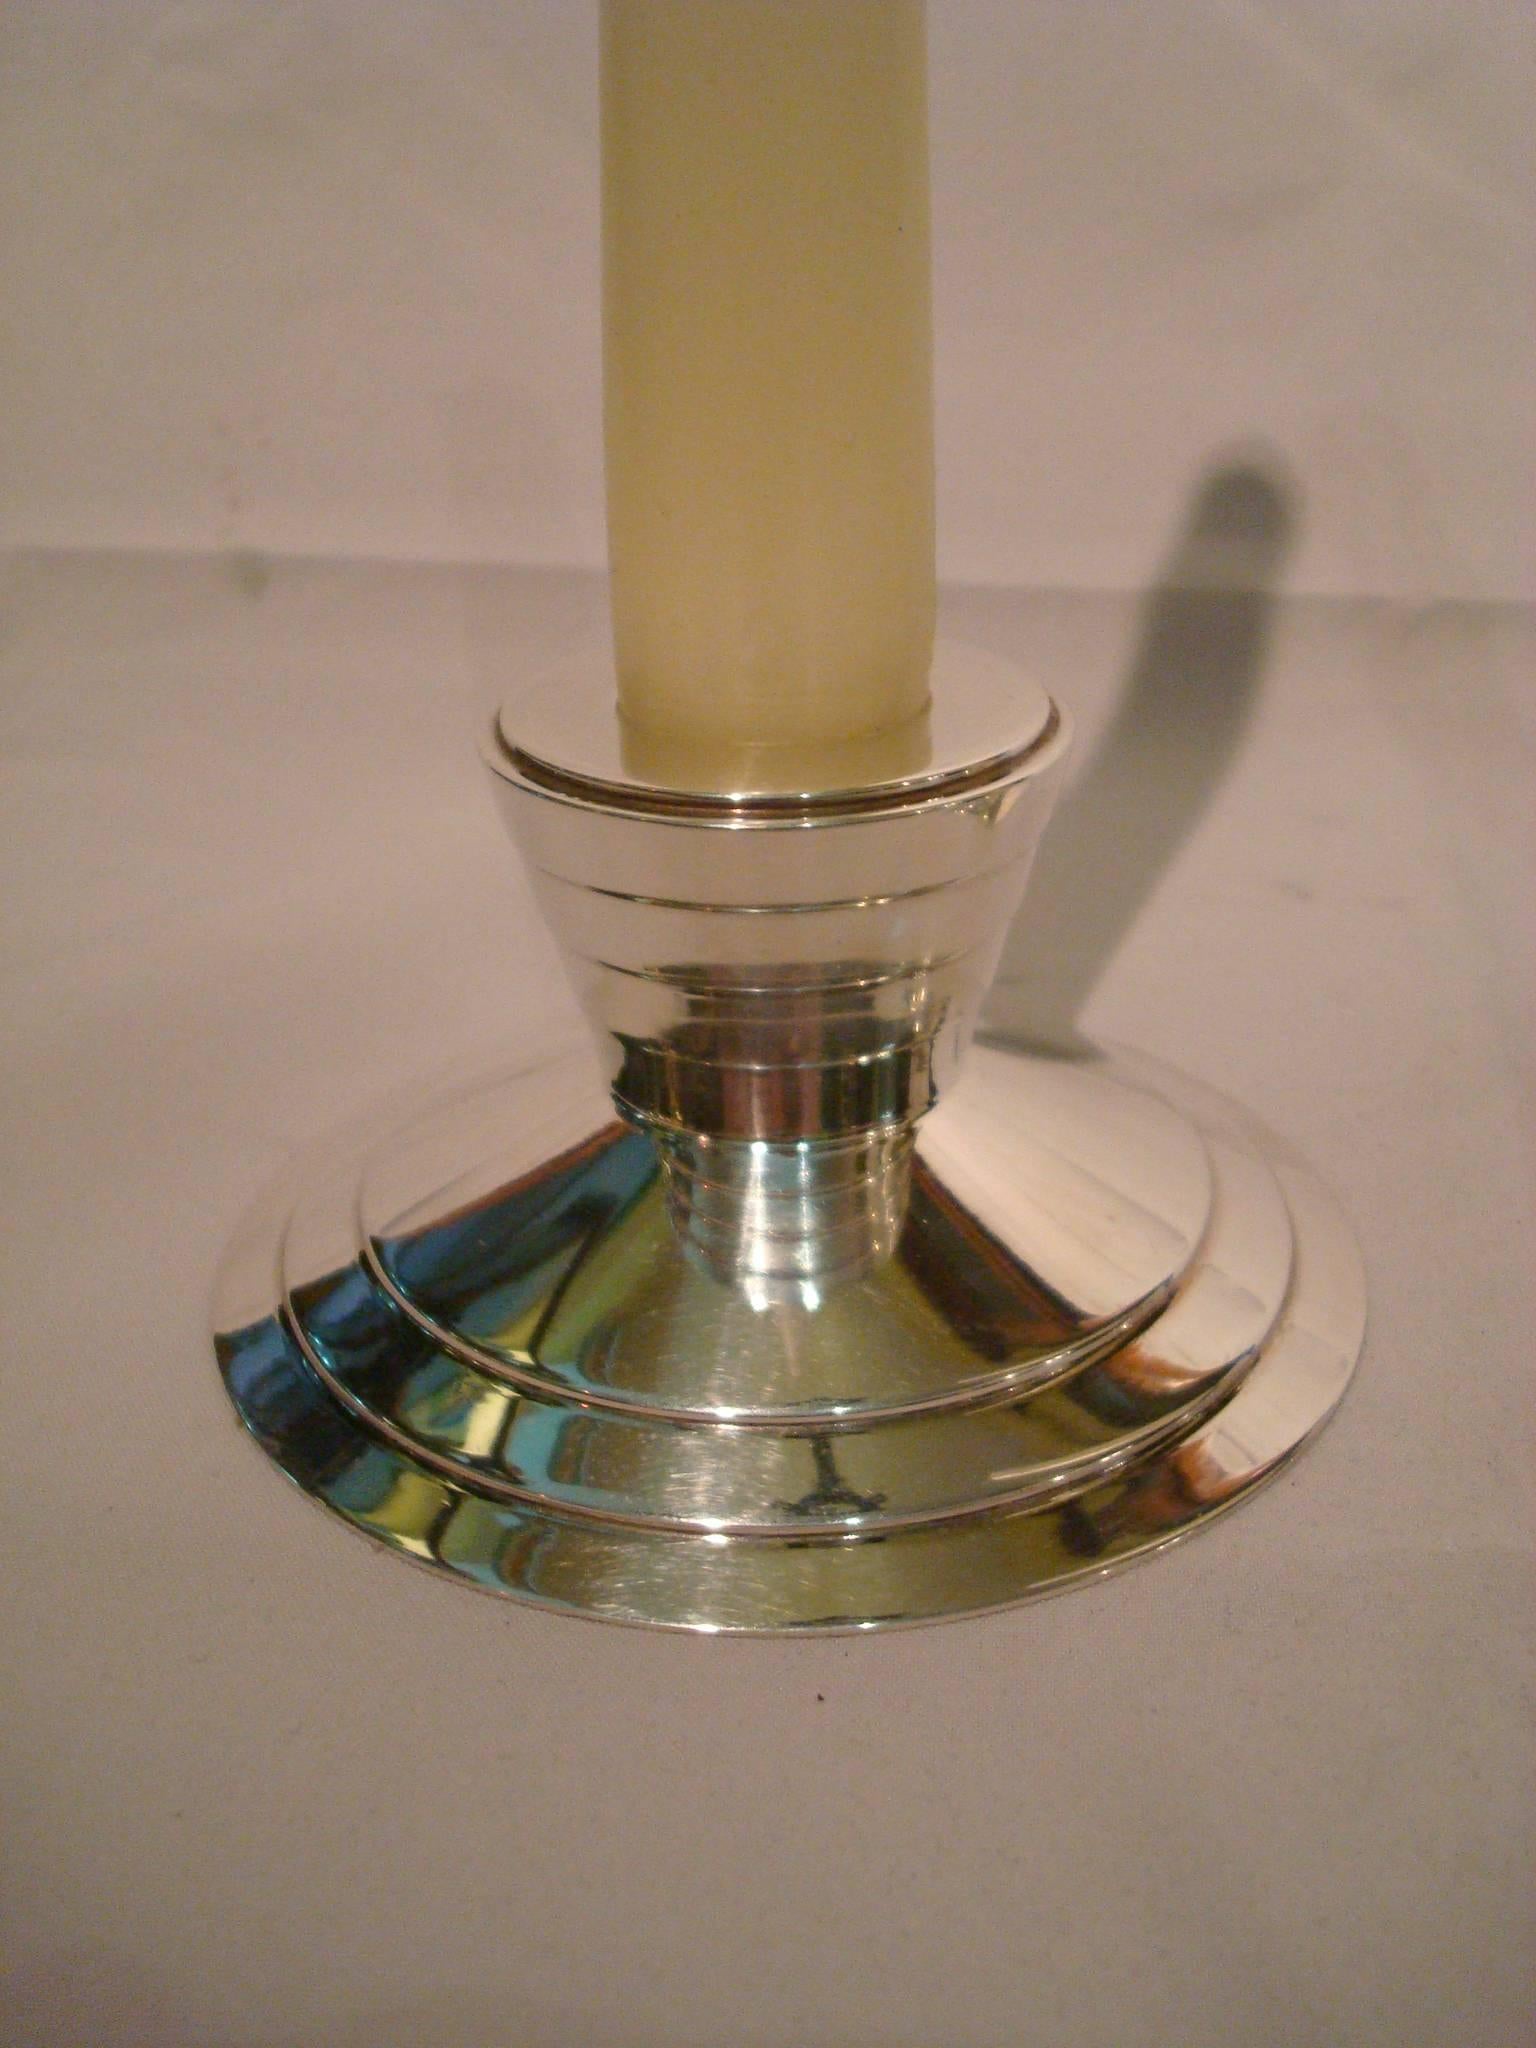 Christofle Mid Century / Art Deco design candelabra candleholder, France, 1970s. They are really chic!
Wine cooler is not included, it´s sold separate.